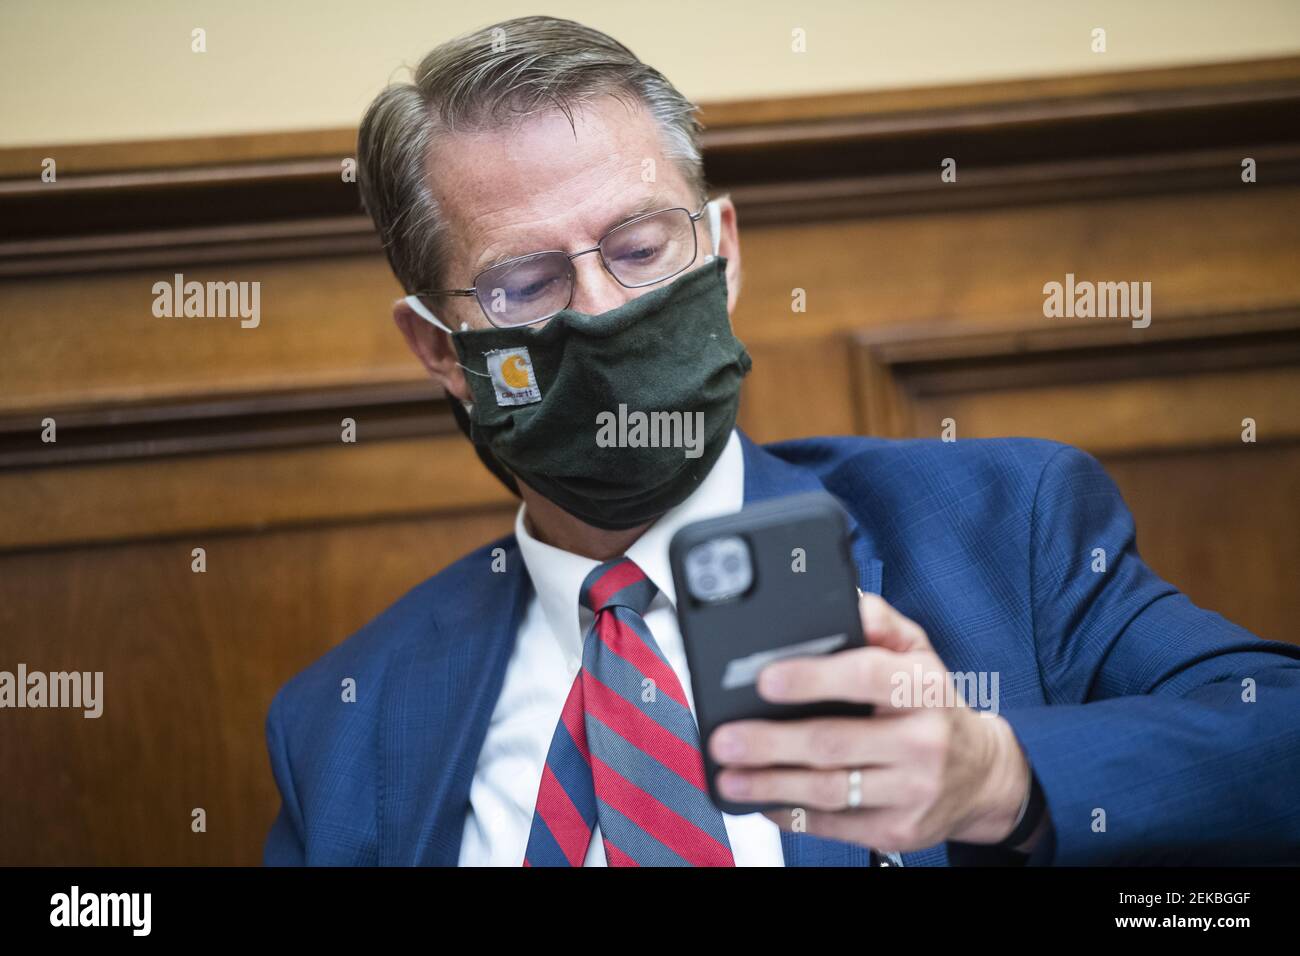 UNITED STATES - JULY 29: Rep. Tim Burchett, R-Tenn., wears a mask made from Carhartt shirt during a House Foreign Affairs Committee markup in Rayburn Building on Wednesday, July 29, 2020. (Photo By Tom Williams/CQ Roll Call/Sipa USA) Stock Photo